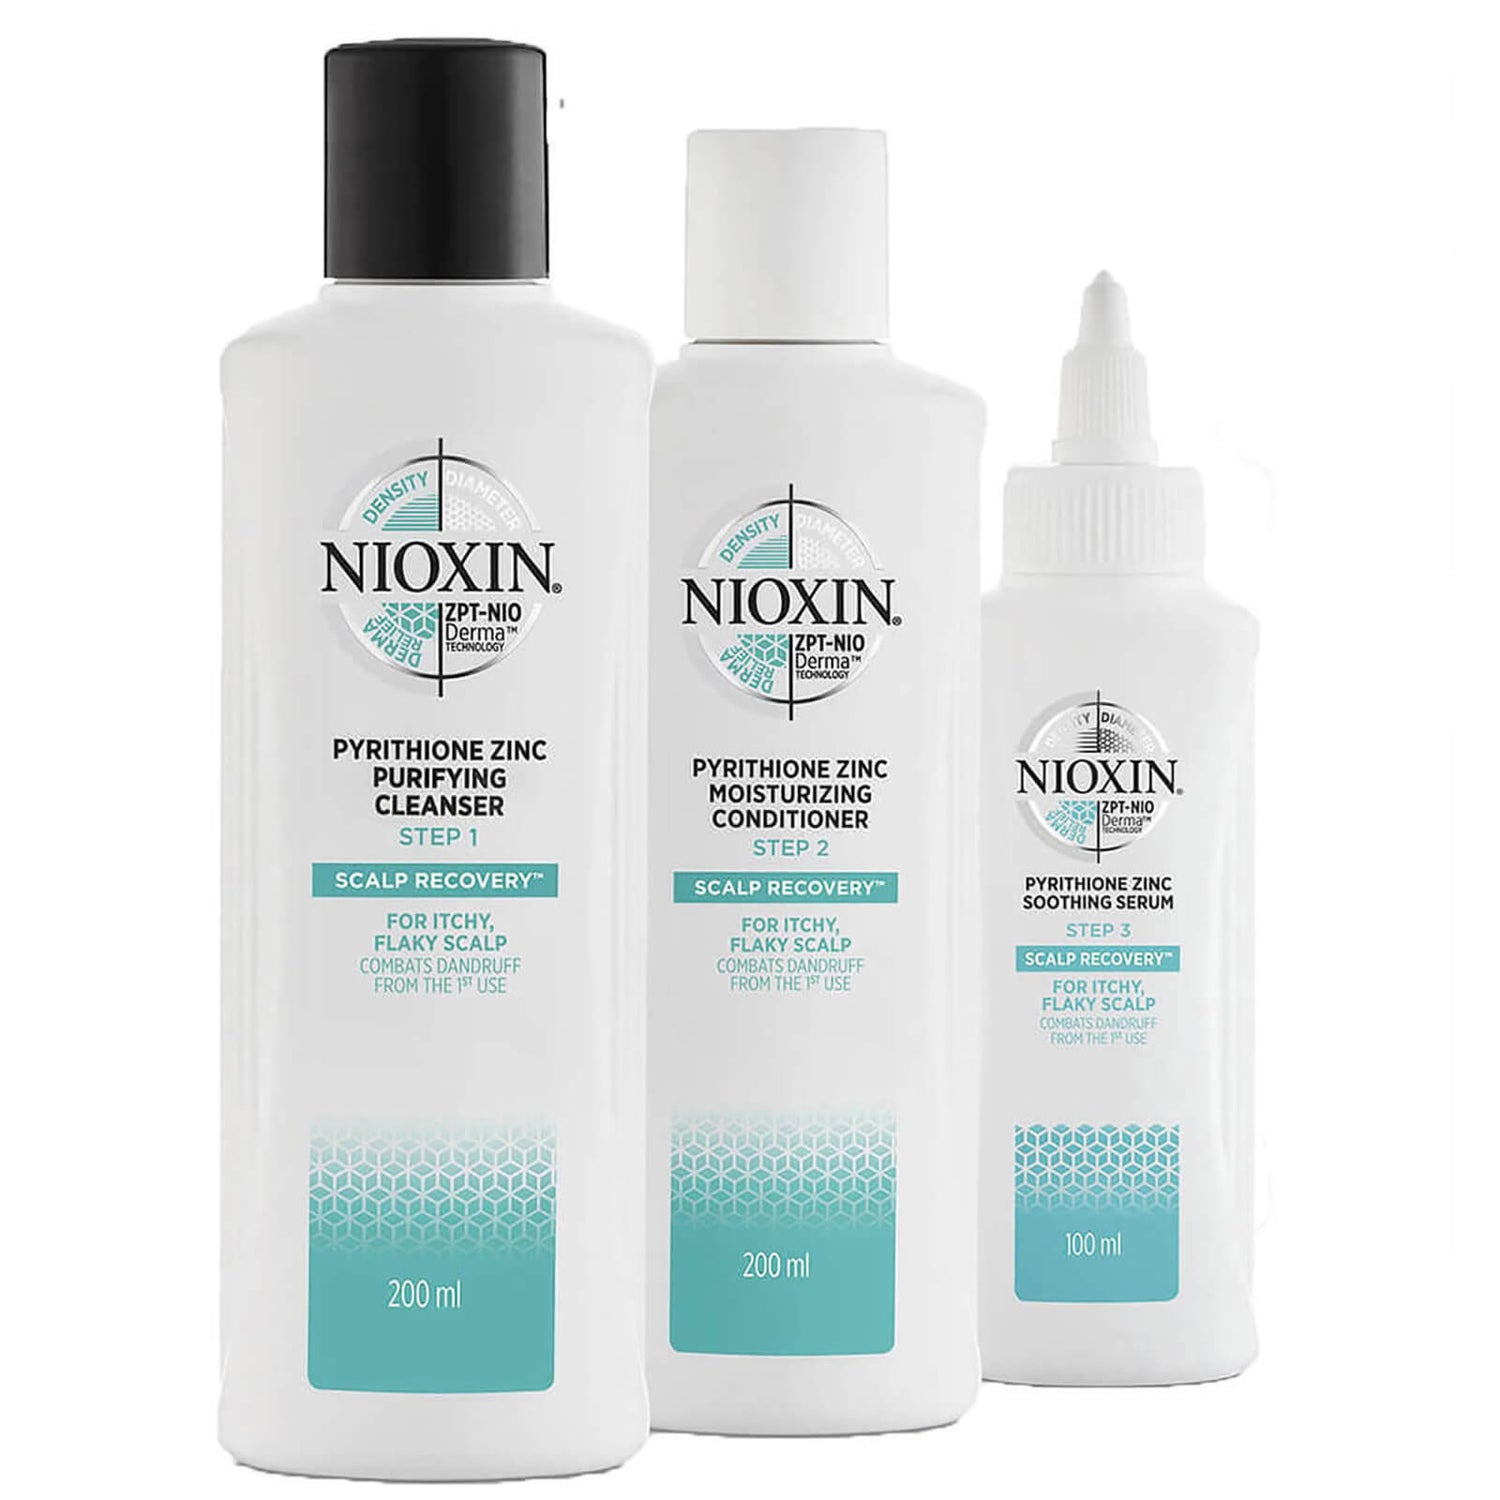 NIOXIN Scalp Recovery 3-Step Anti-Dandruff System for Itchy, Flaky Scalp -hilsehoito